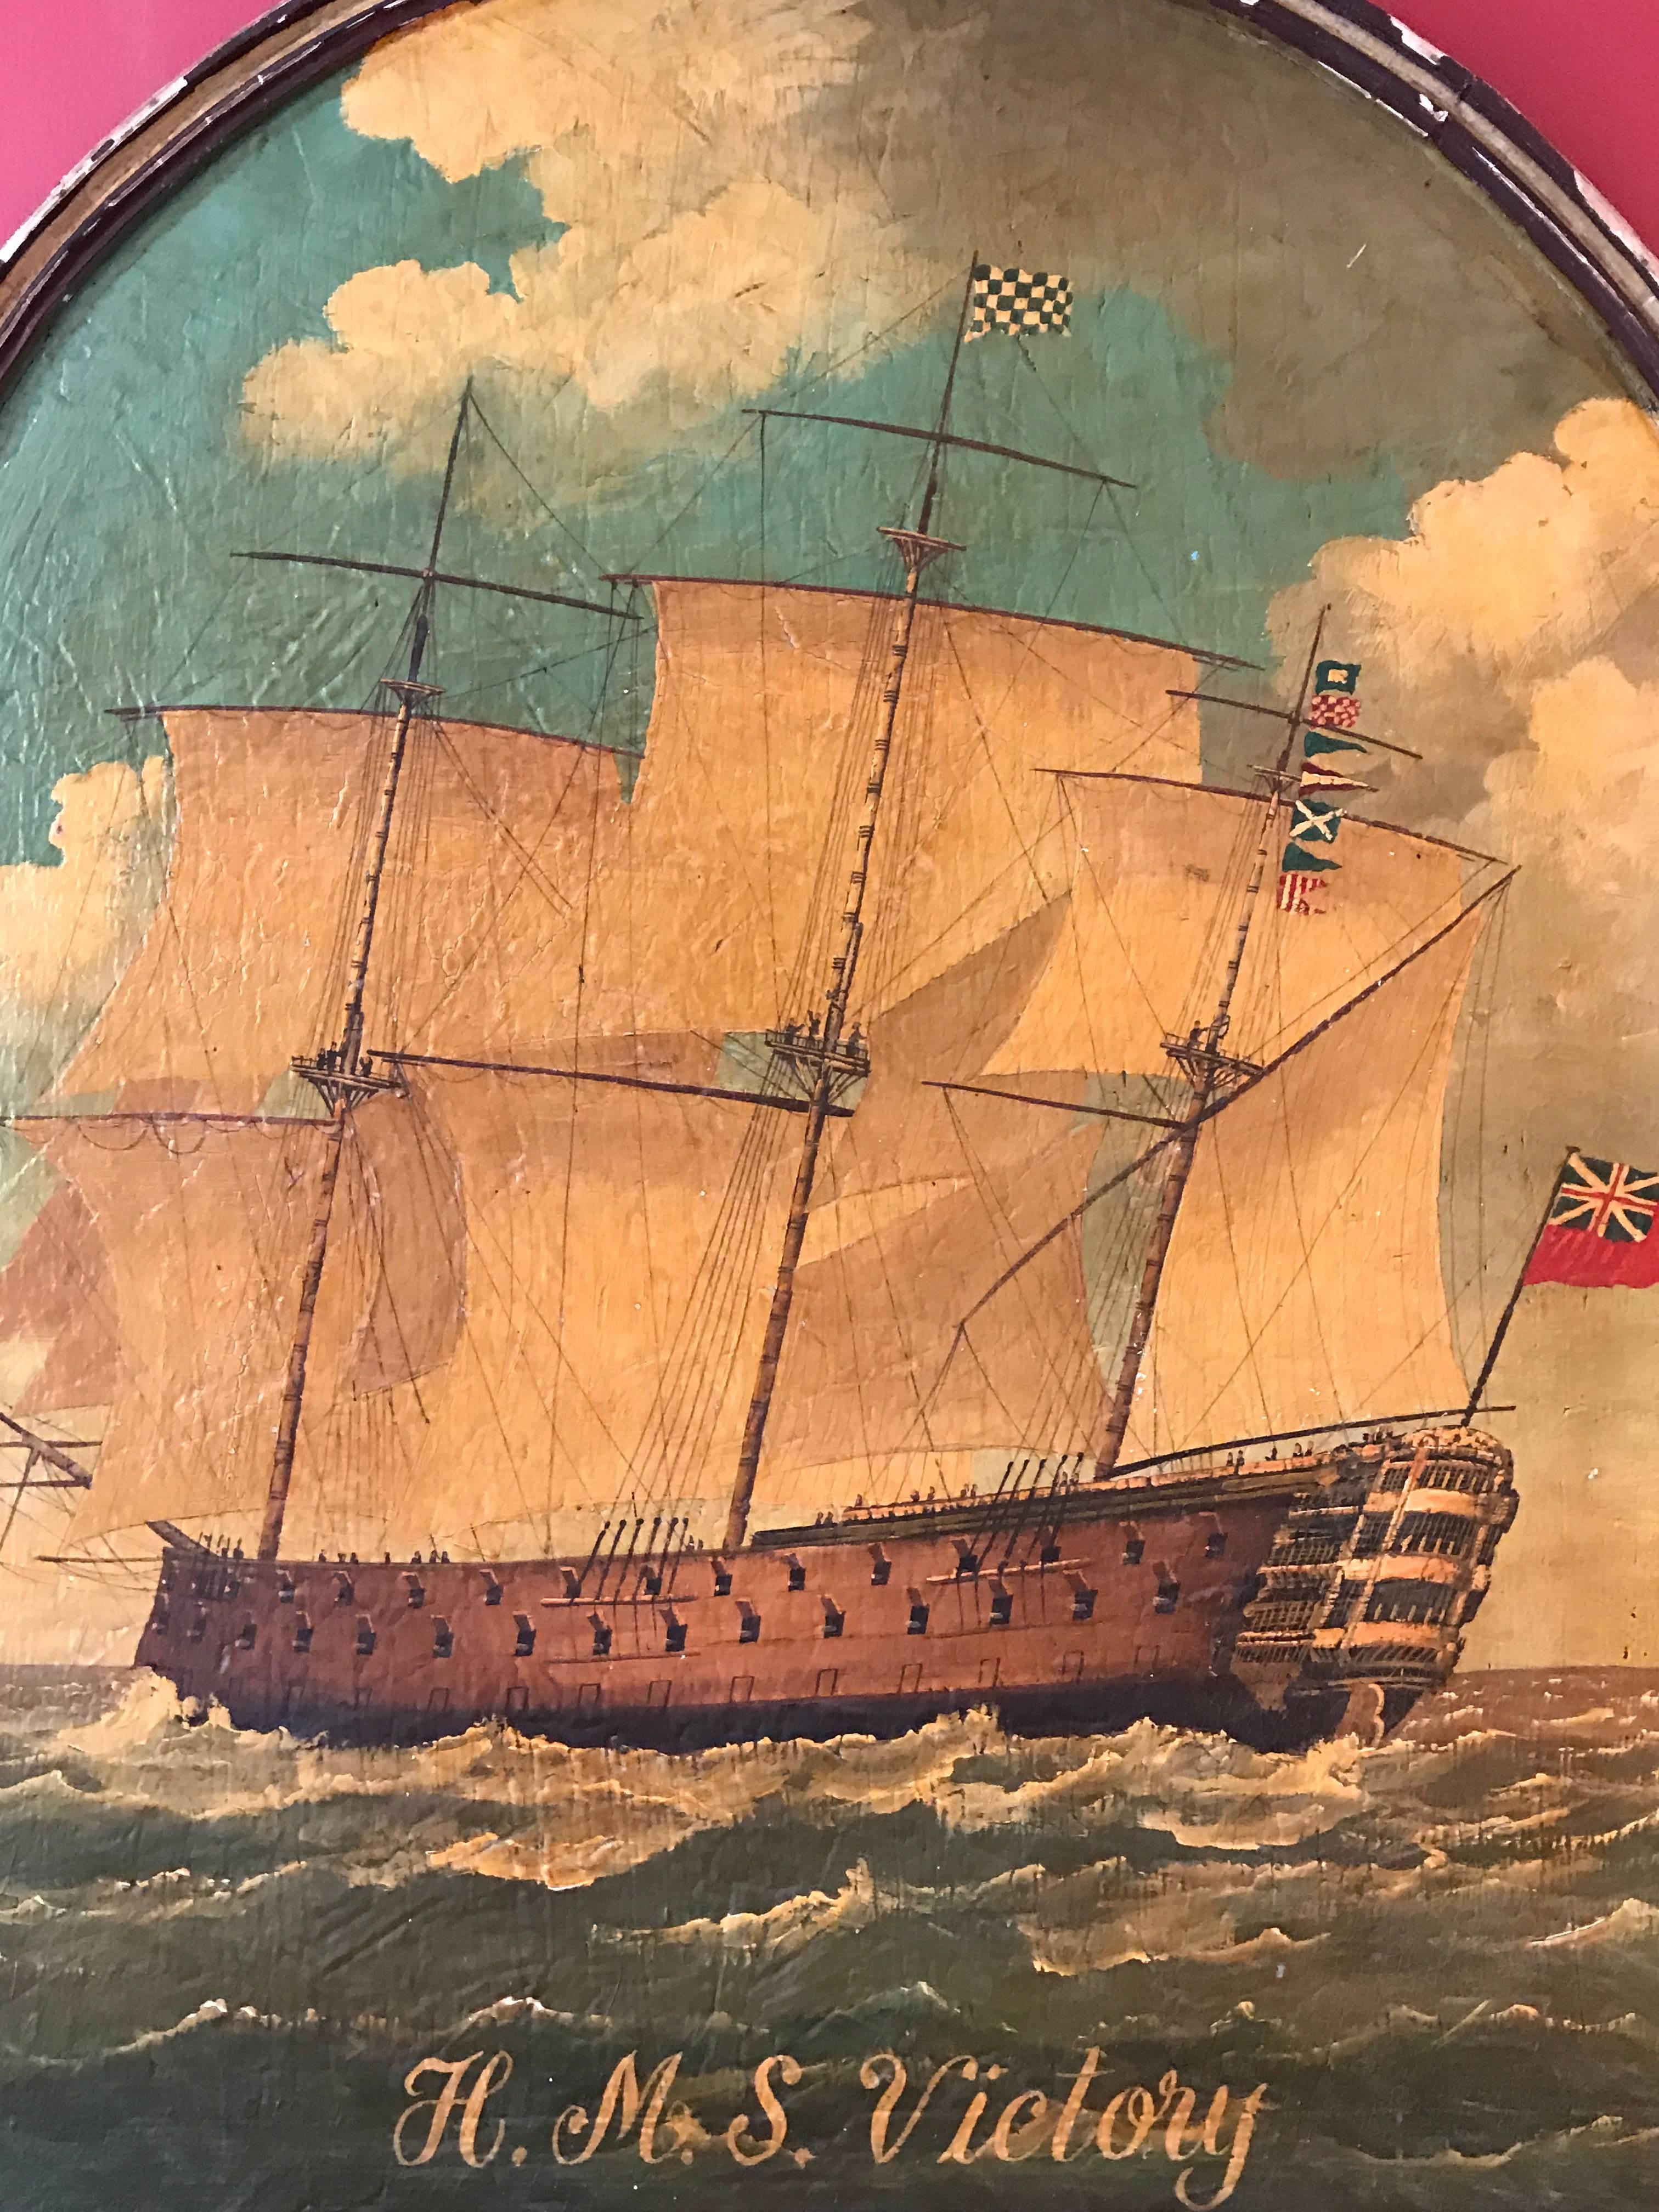 the ship victory pub sign